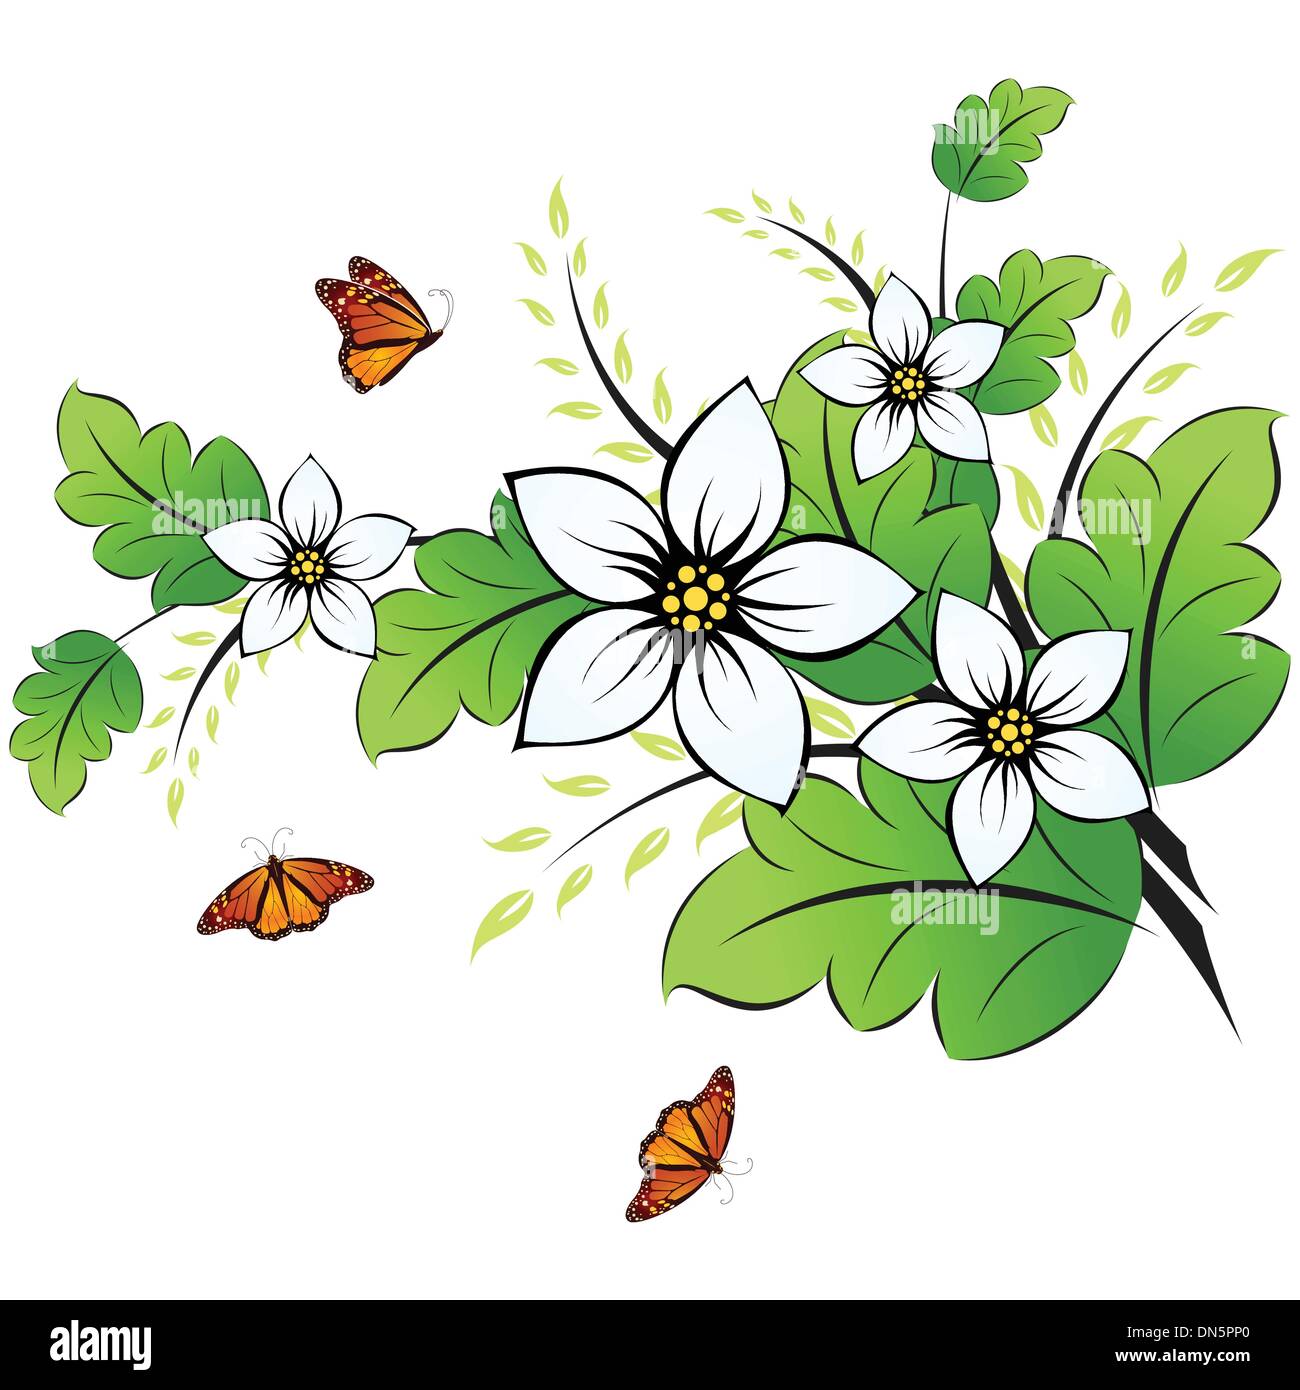 Flower background with butterfly Stock Vector